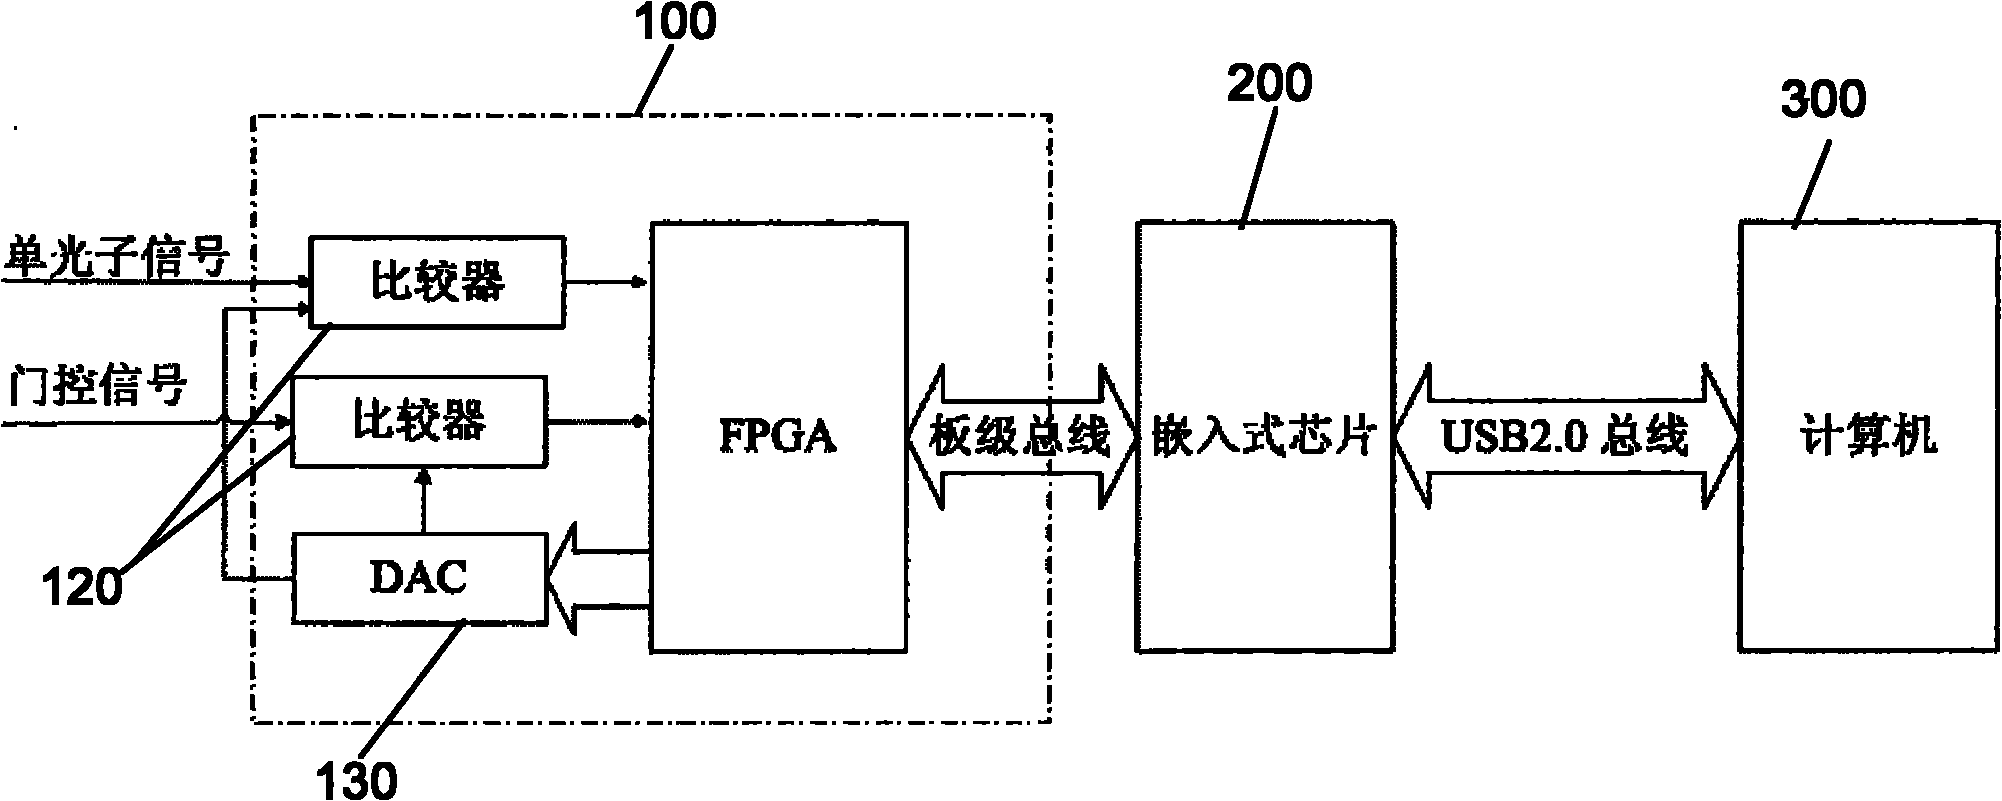 Single-photon counting system and counting method